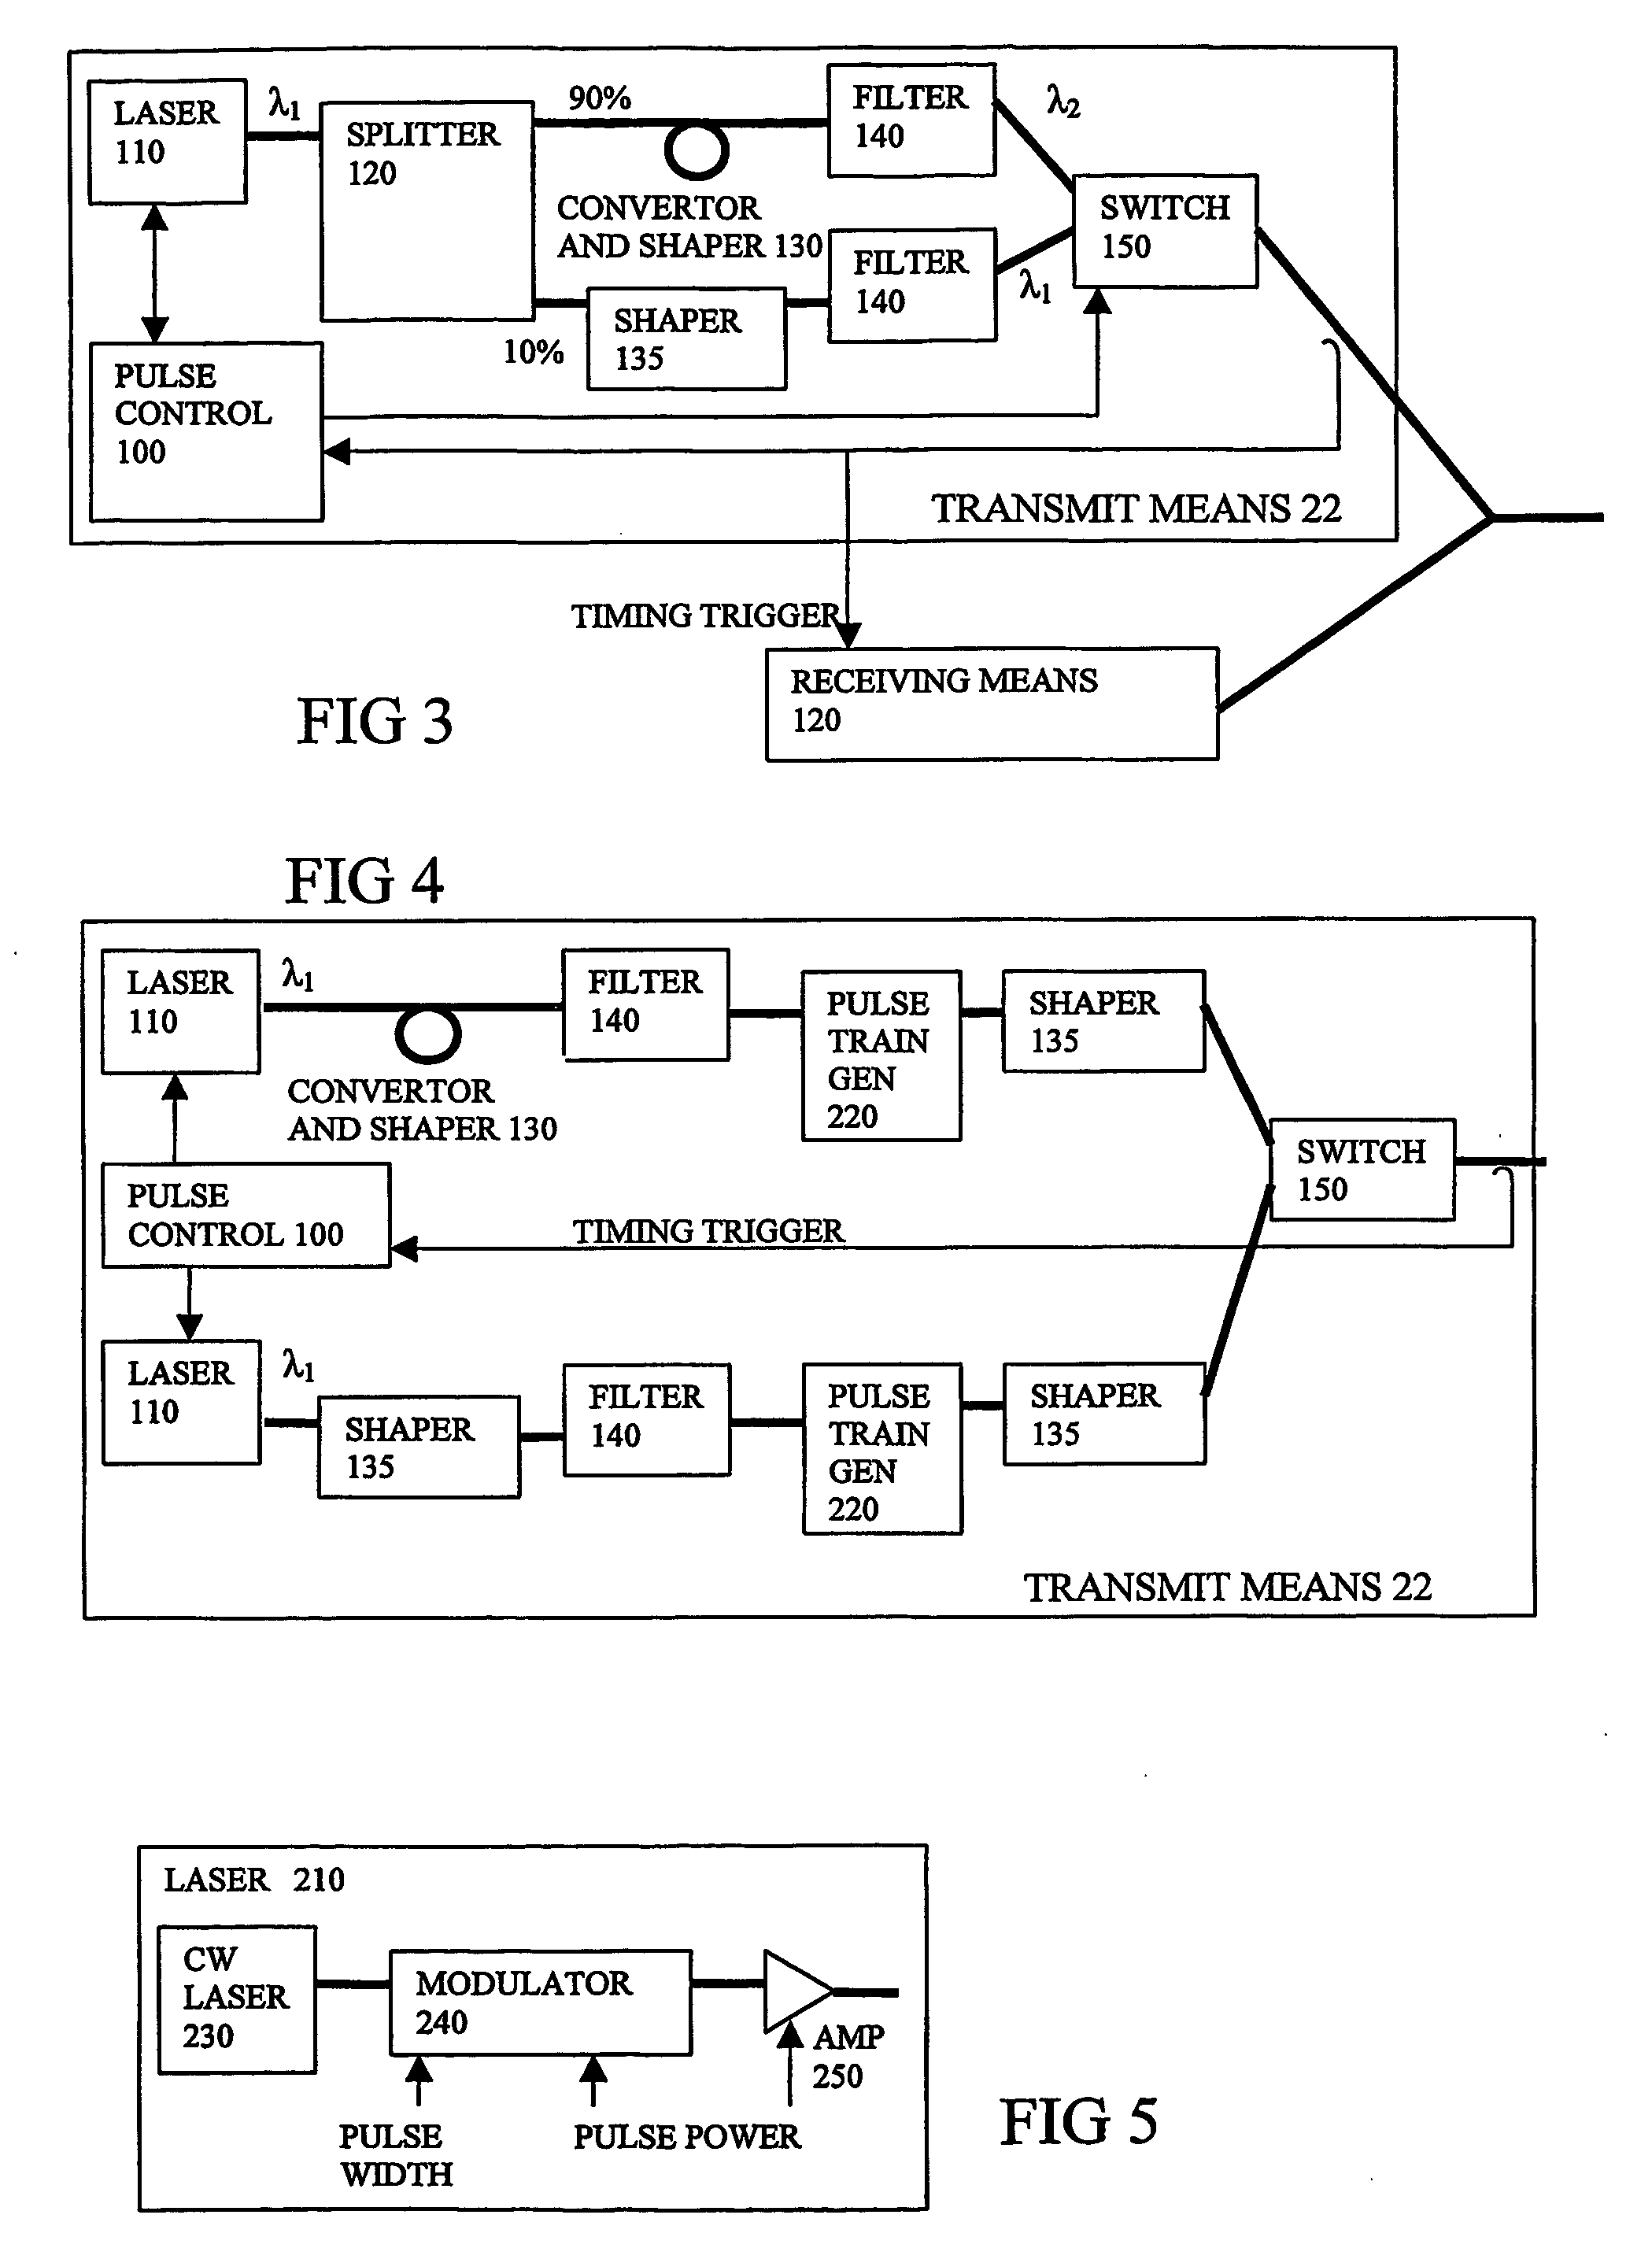 Method and apparatus for generation and transmission of high energy optical pulses for long range measurements